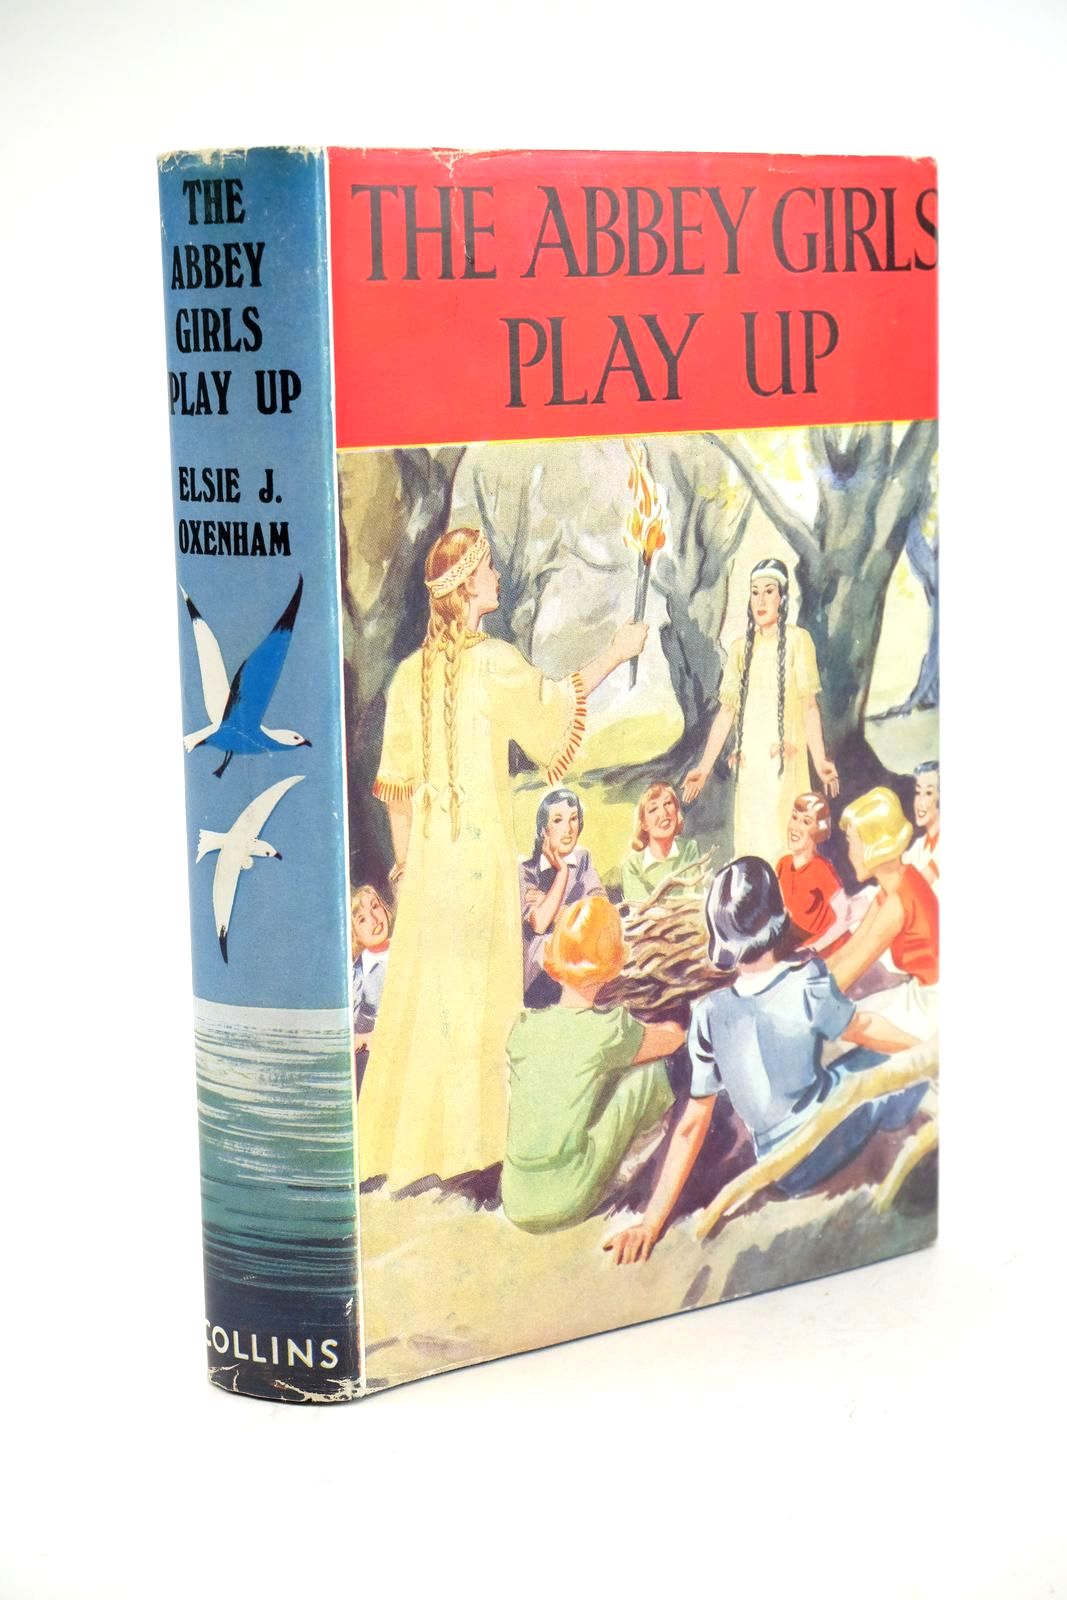 Photo of THE ABBEY GIRLS PLAY UP written by Oxenham, Elsie J. published by Collins (STOCK CODE: 1324513)  for sale by Stella & Rose's Books